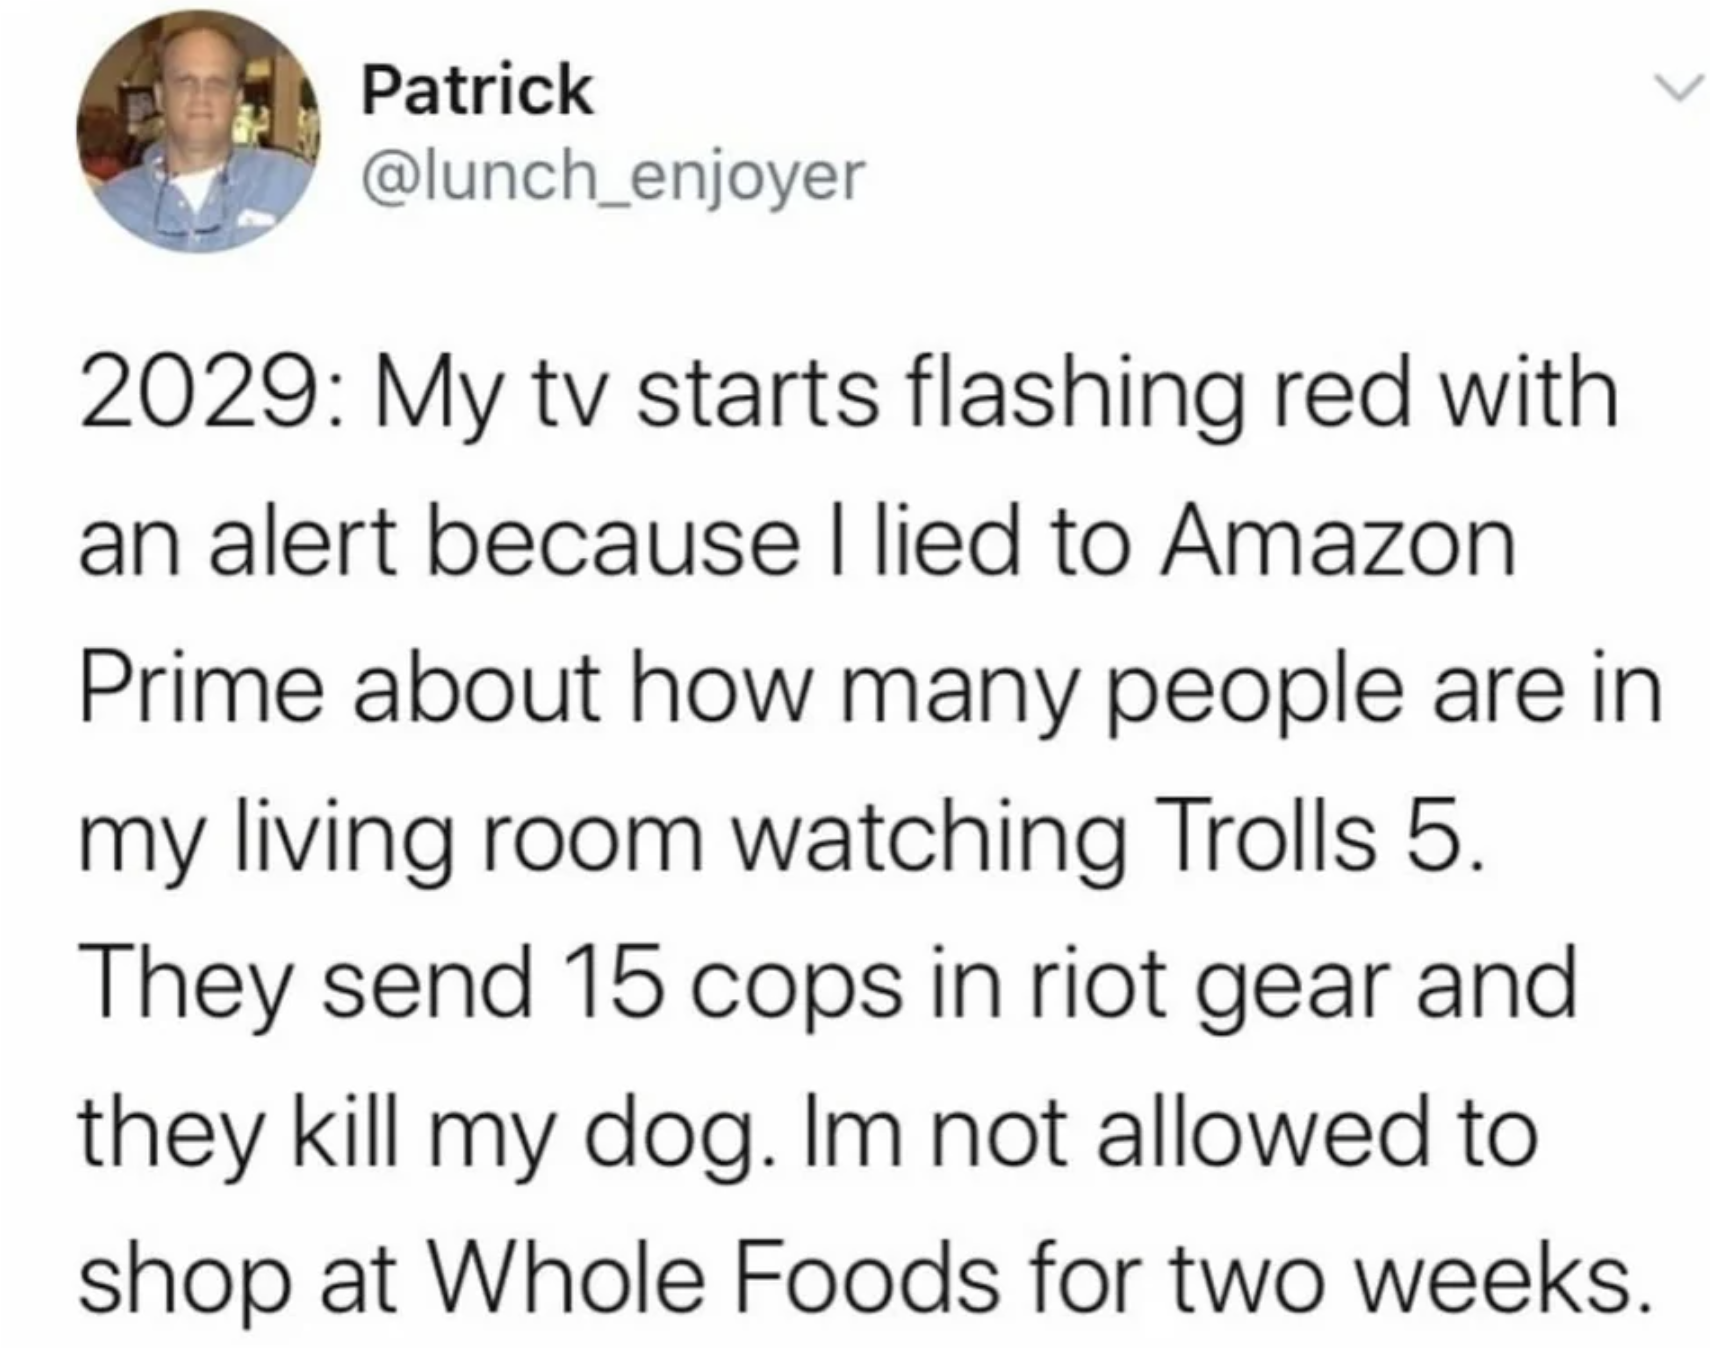 screenshot - Patrick 2029 My tv starts flashing red with an alert because I lied to Amazon Prime about how many people are in my living room watching Trolls 5. They send 15 cops in riot gear and they kill my dog. Im not allowed to shop at Whole Foods for 